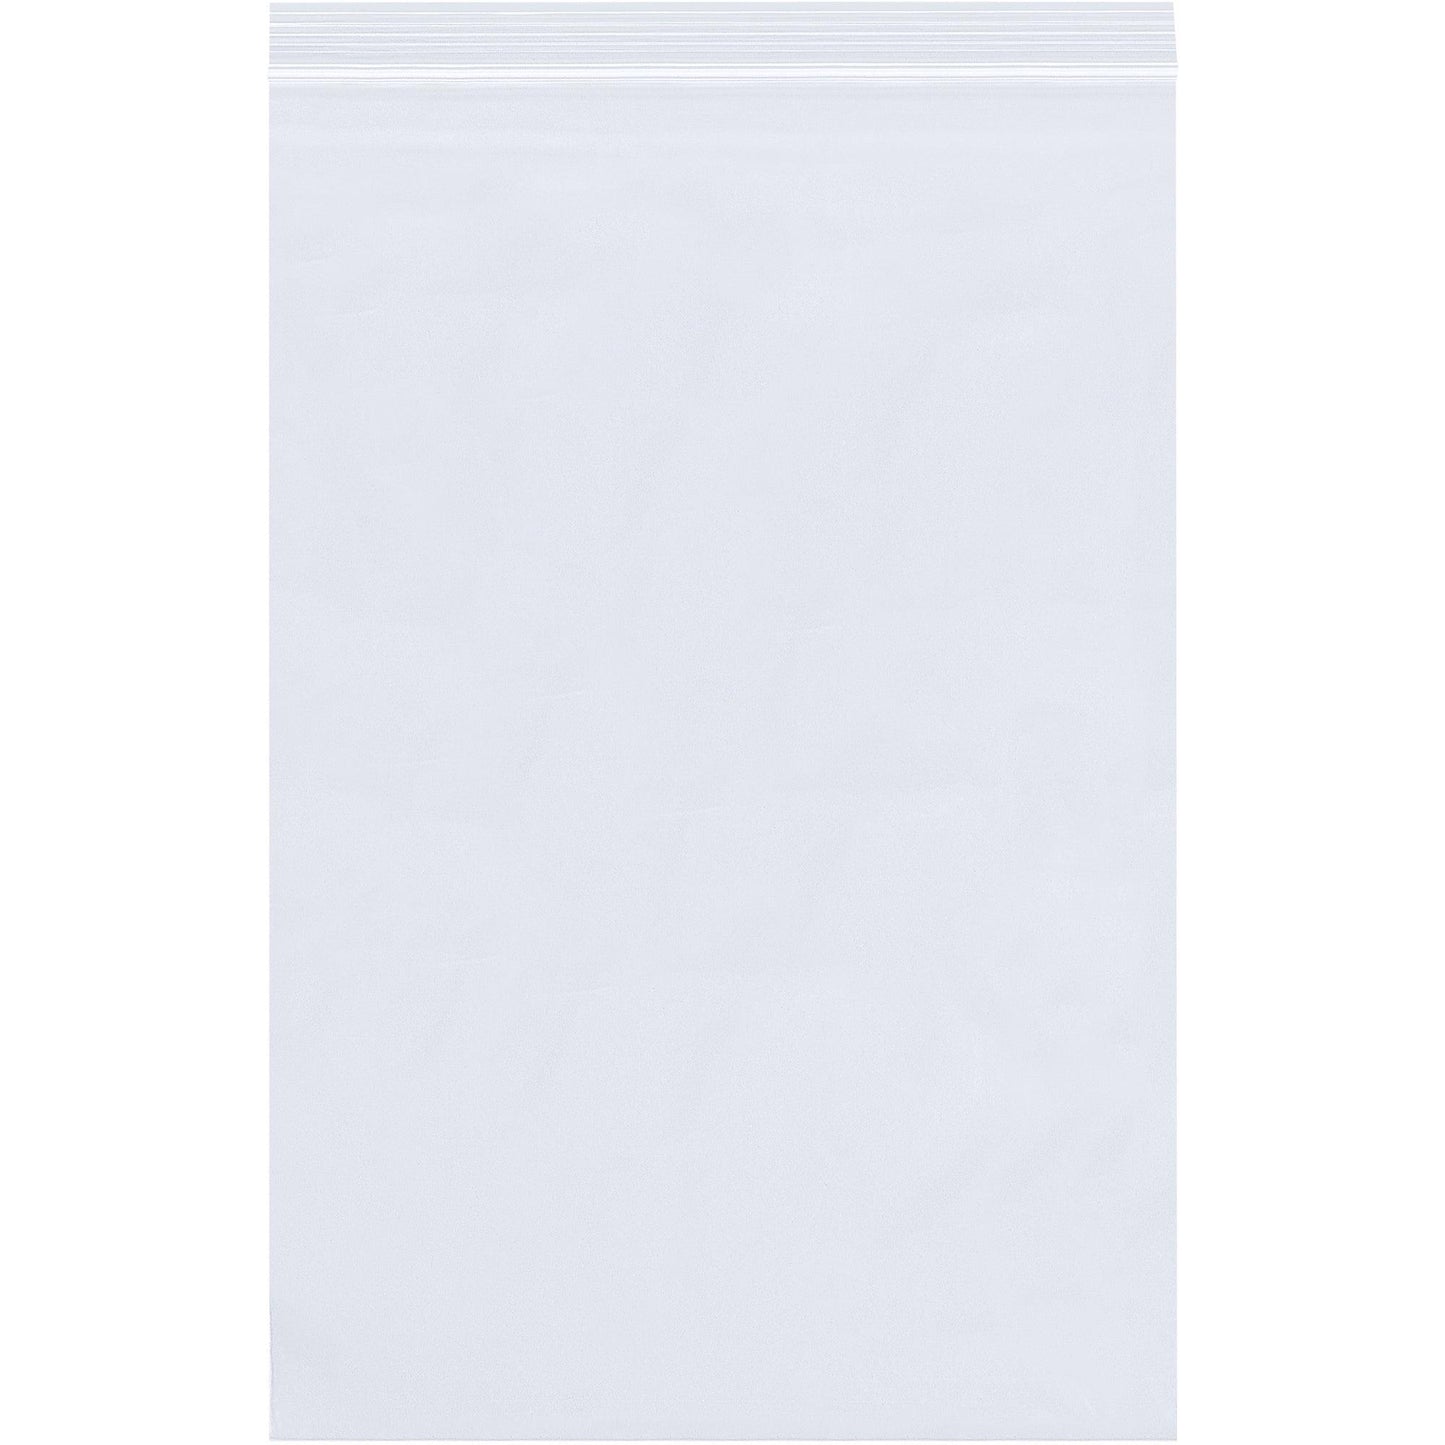 12 x 12" - 2 Mil Reclosable Poly Bags - PB3665